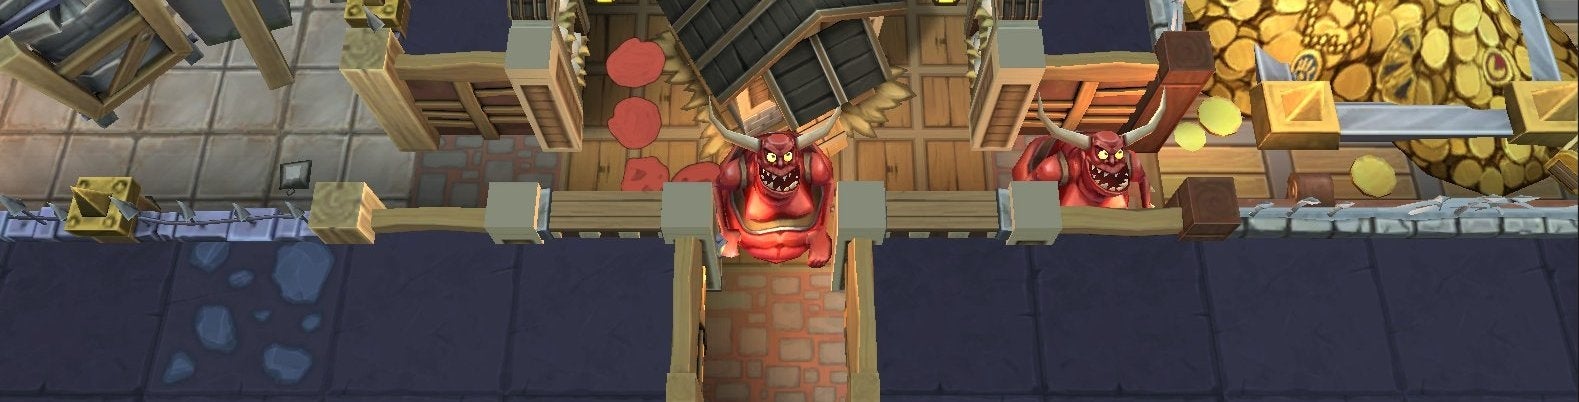 Image for Will EA learn from the terrible Dungeon Keeper mobile game?